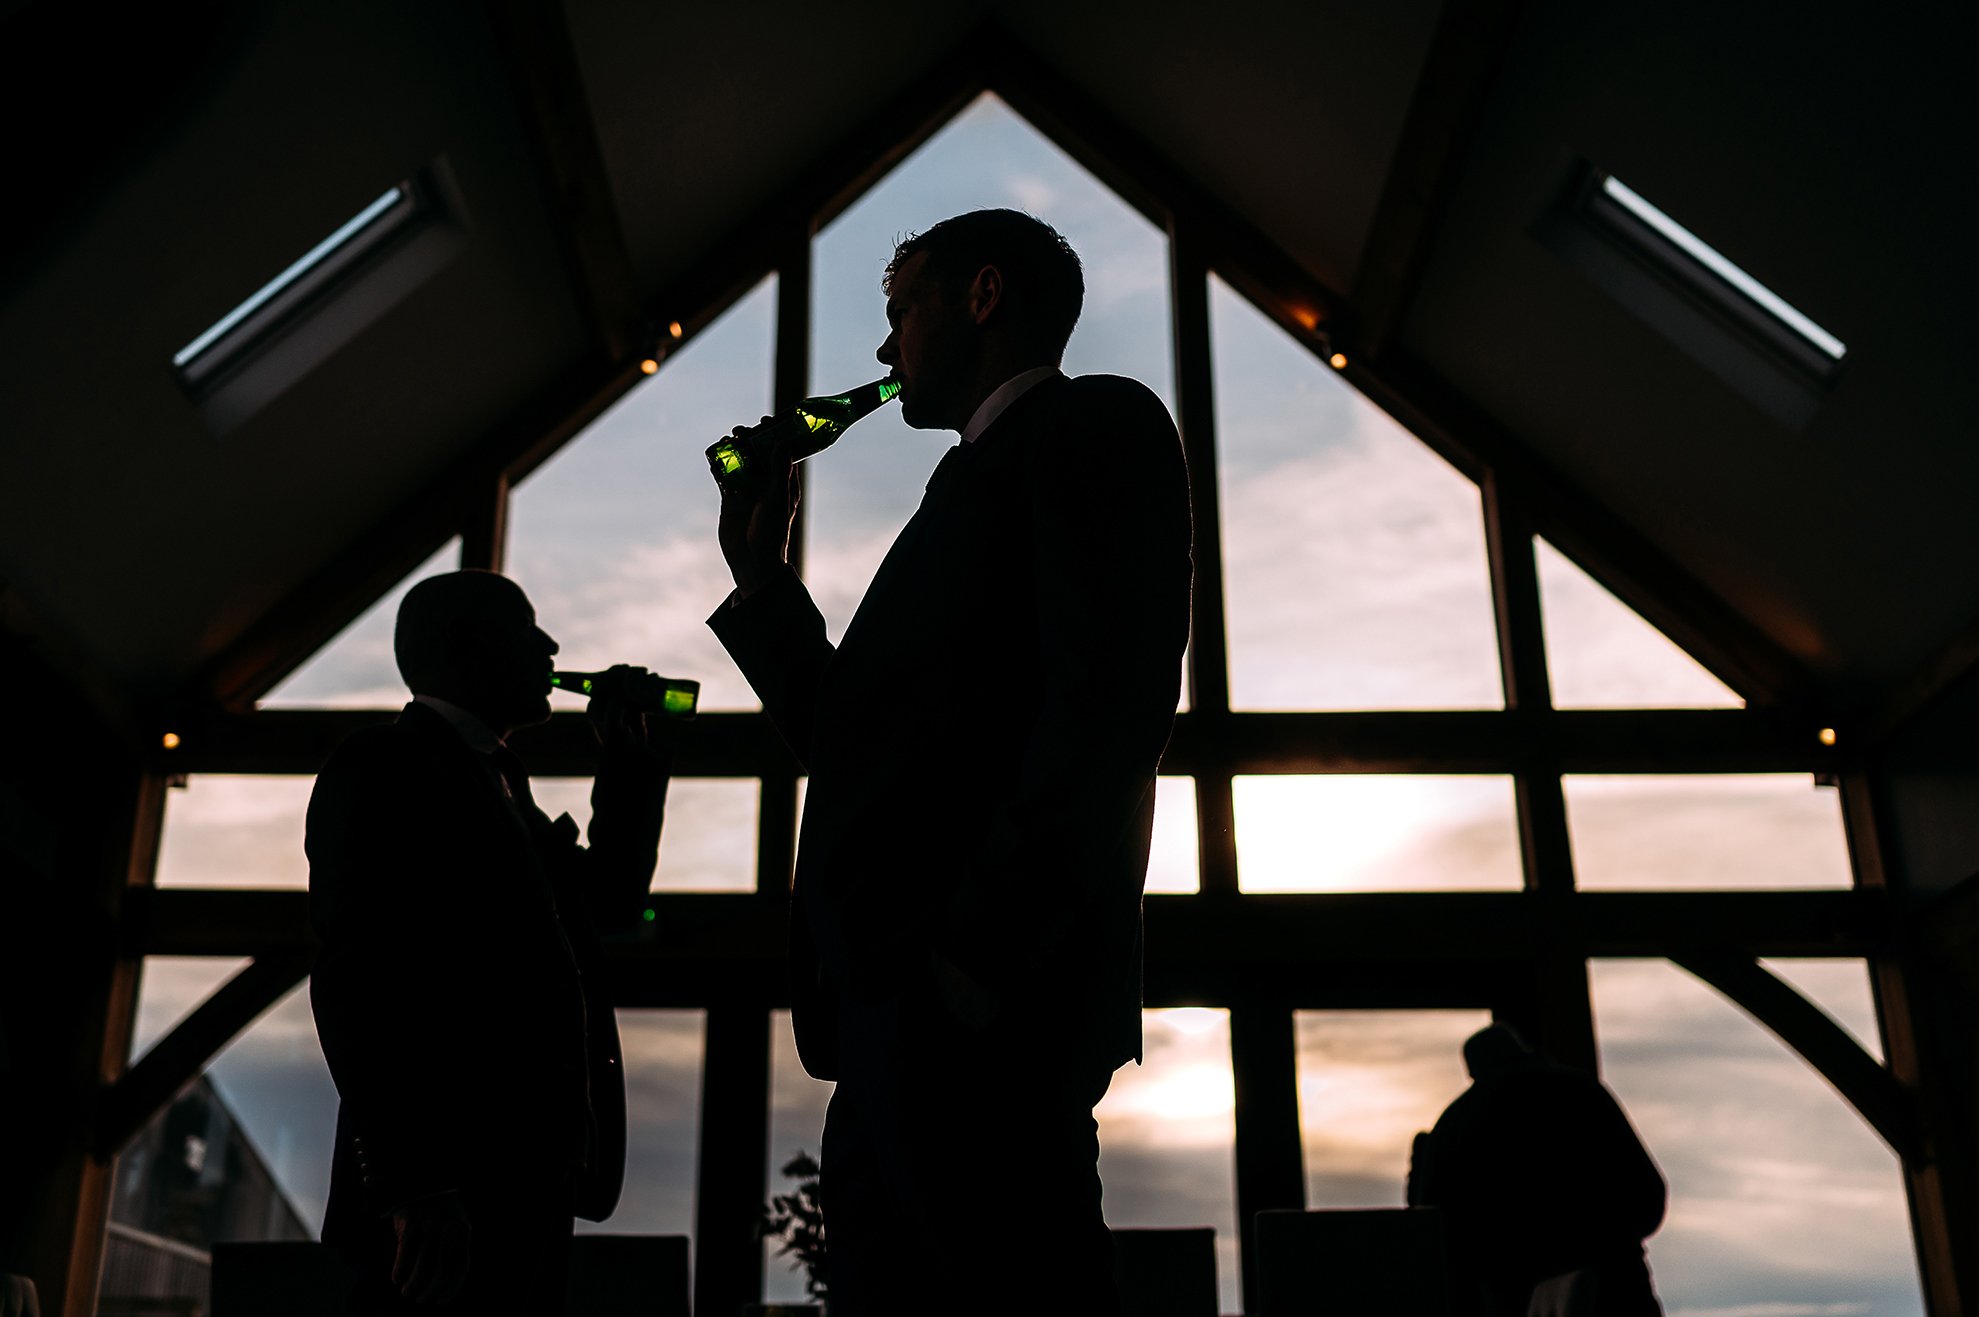  Silhouette of men drinking beer in a cool window. 